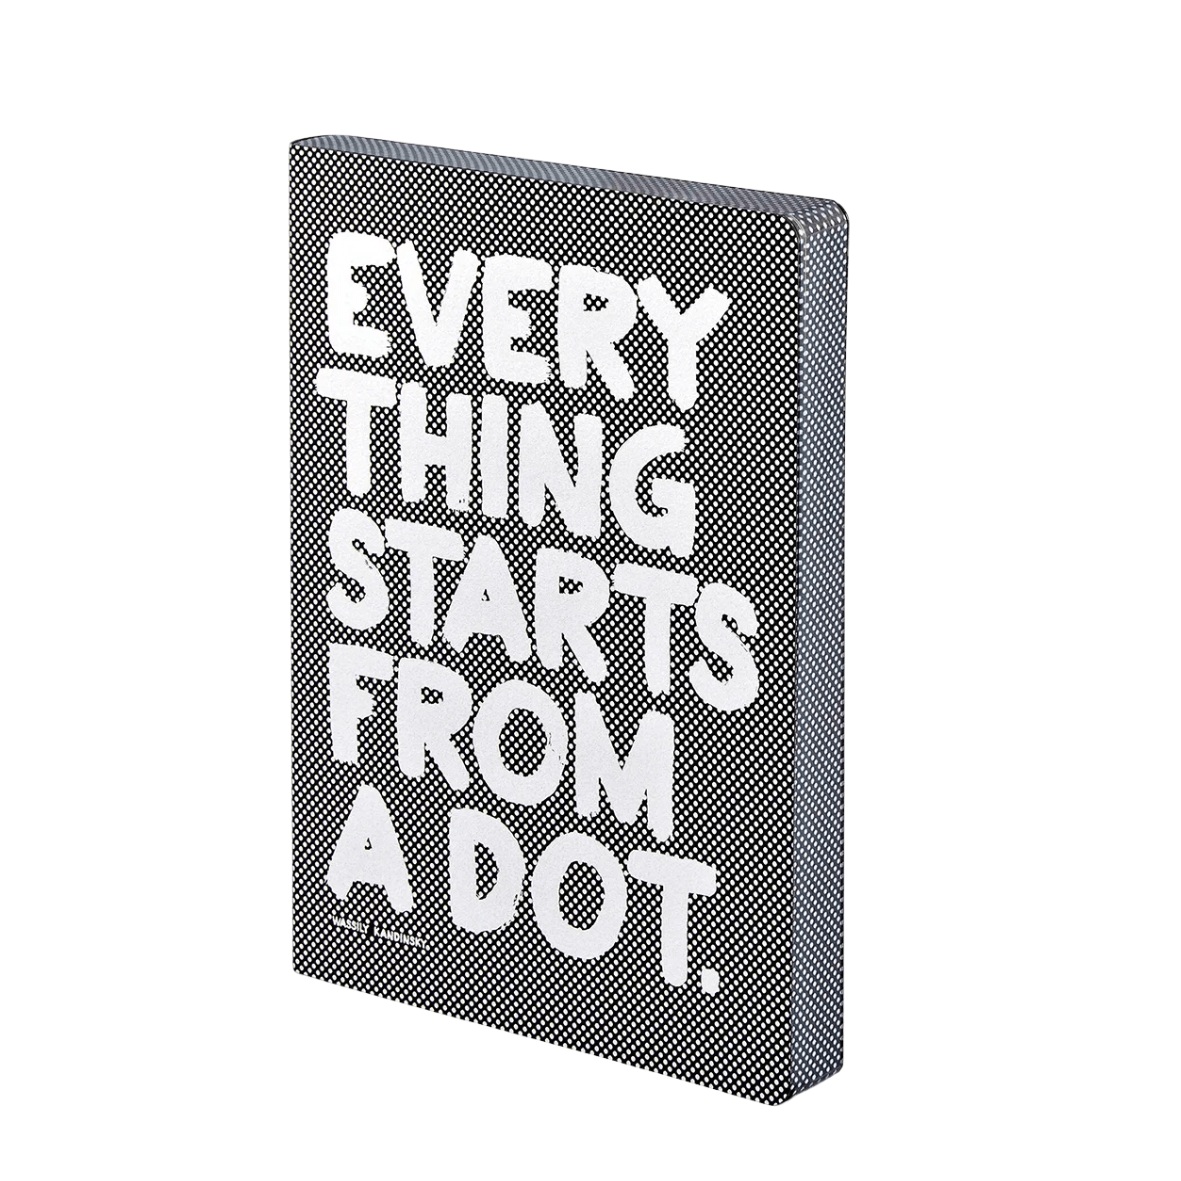 Nuuna notitieboek Everything starts from a dot